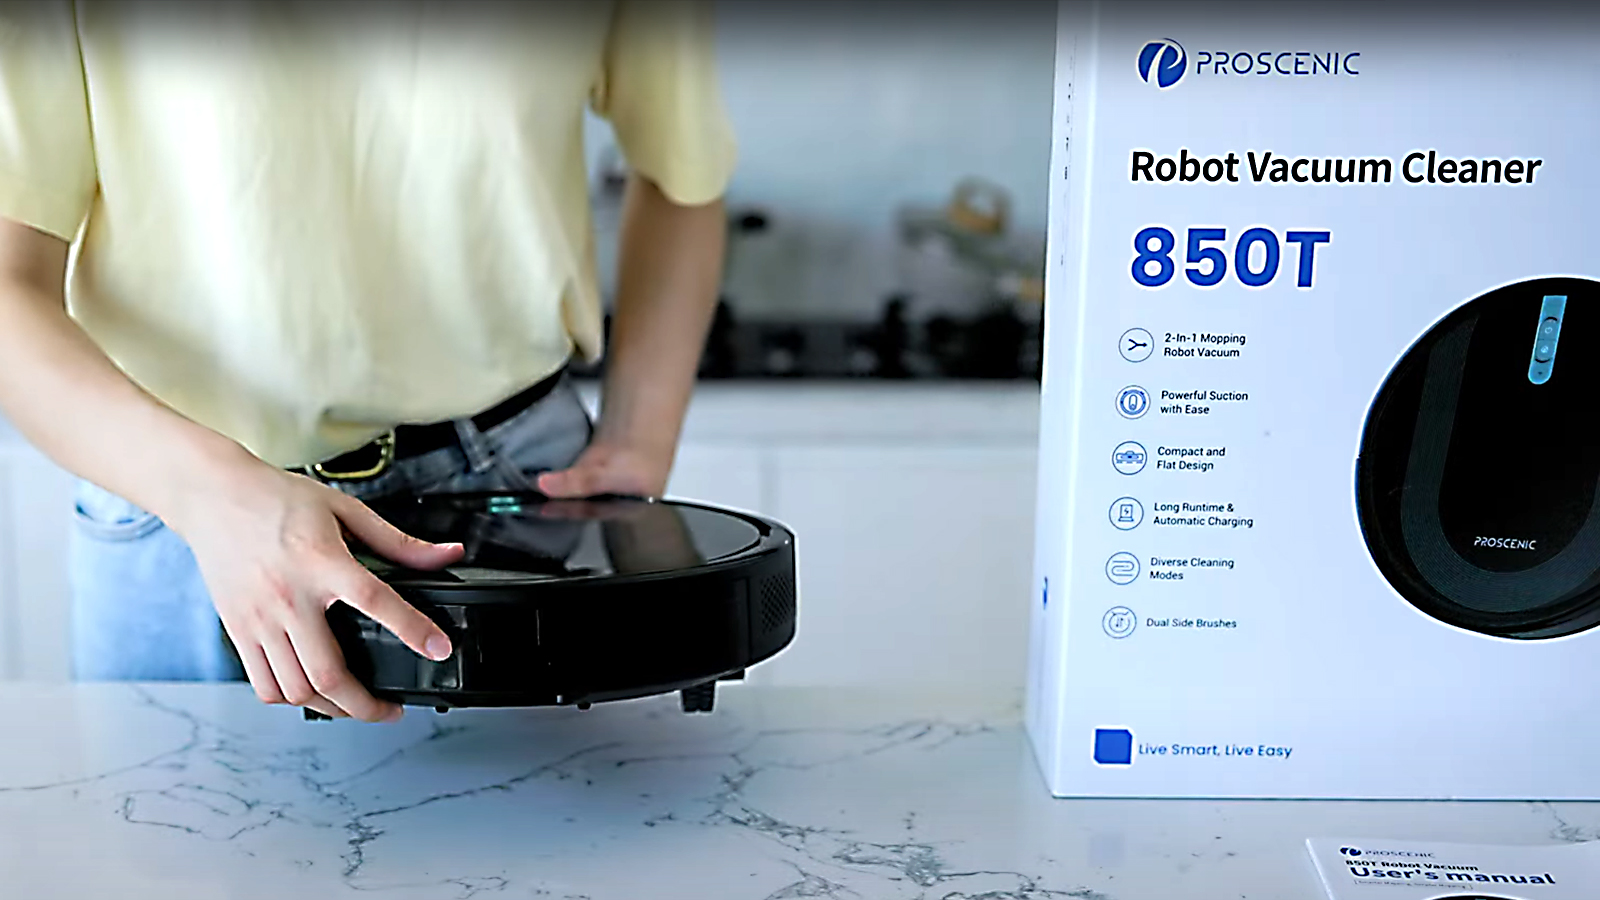 How to Use Proscenic 850T Robot Vacuum